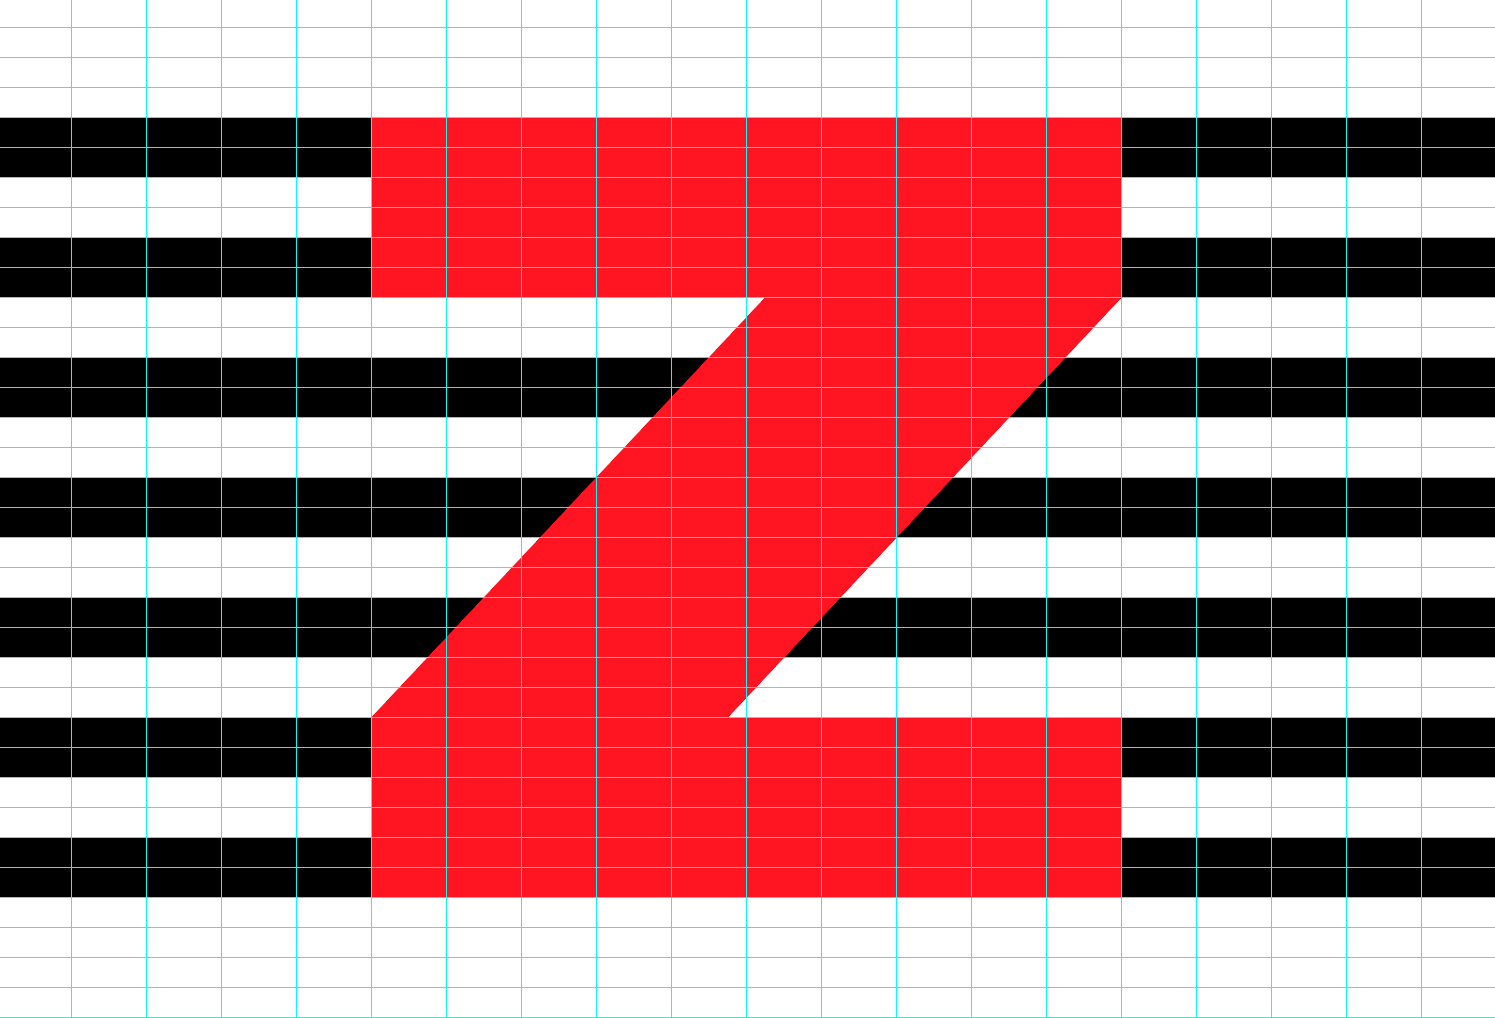 A big Z to serve as a blanketed logo object